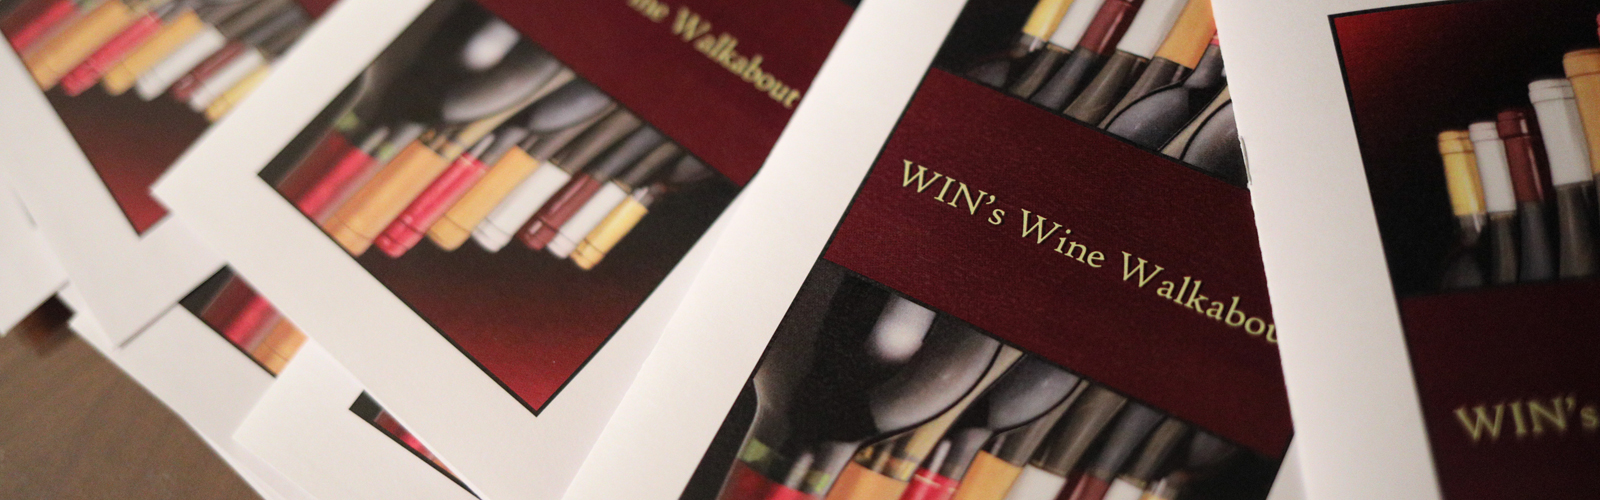 A photograph of Wine Walkabout programs from a previous Wine Walkabout event